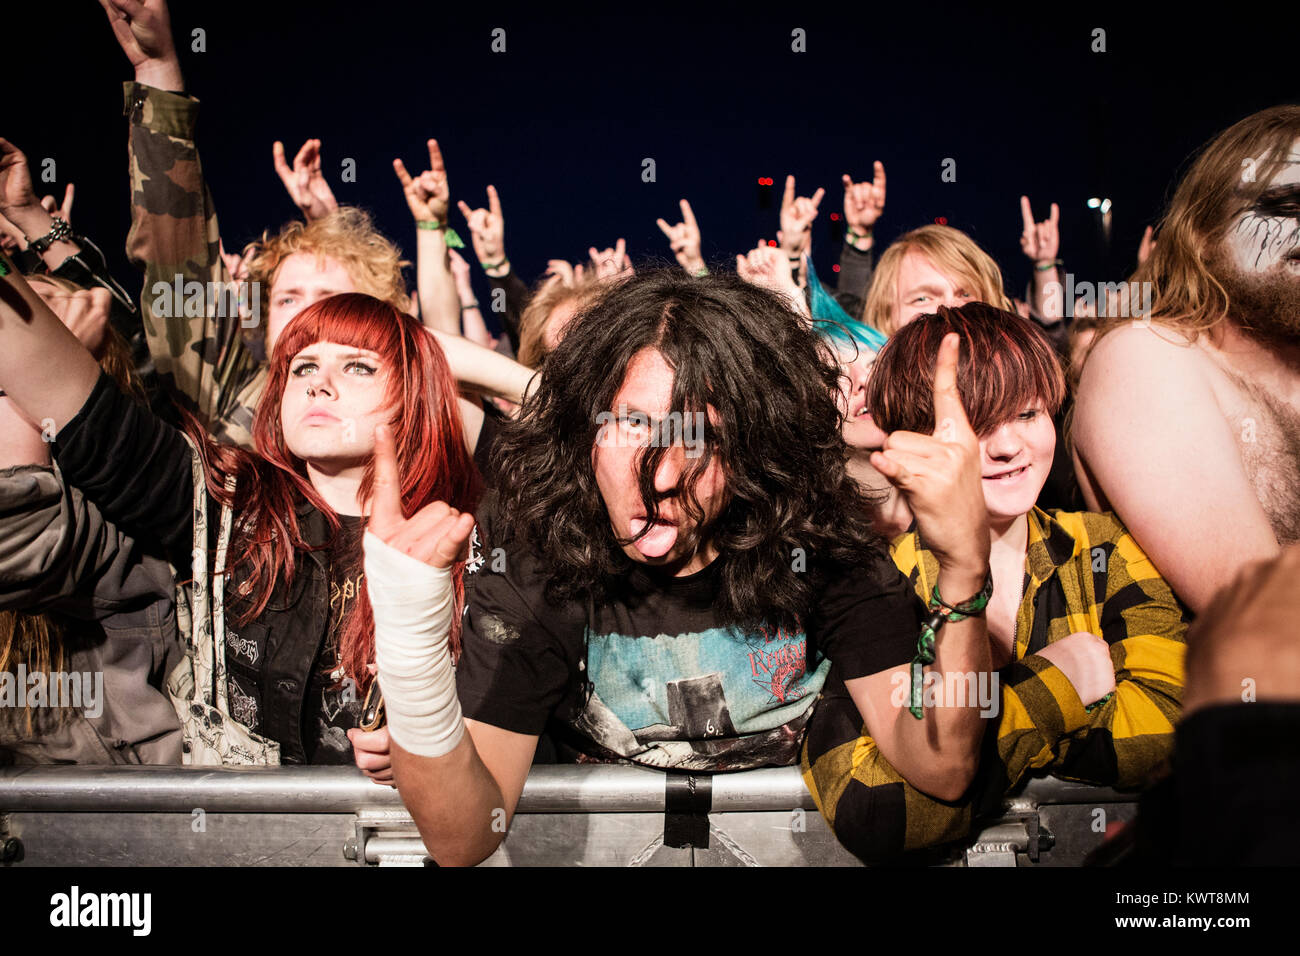 Enthusiastic heavy metal fans go crazy at Copenhell heavy metal festival in  Copenhagen. Here they headbang and show the “devil's sign” at a concert  with the Norwegian black metal band Taake. Denmark